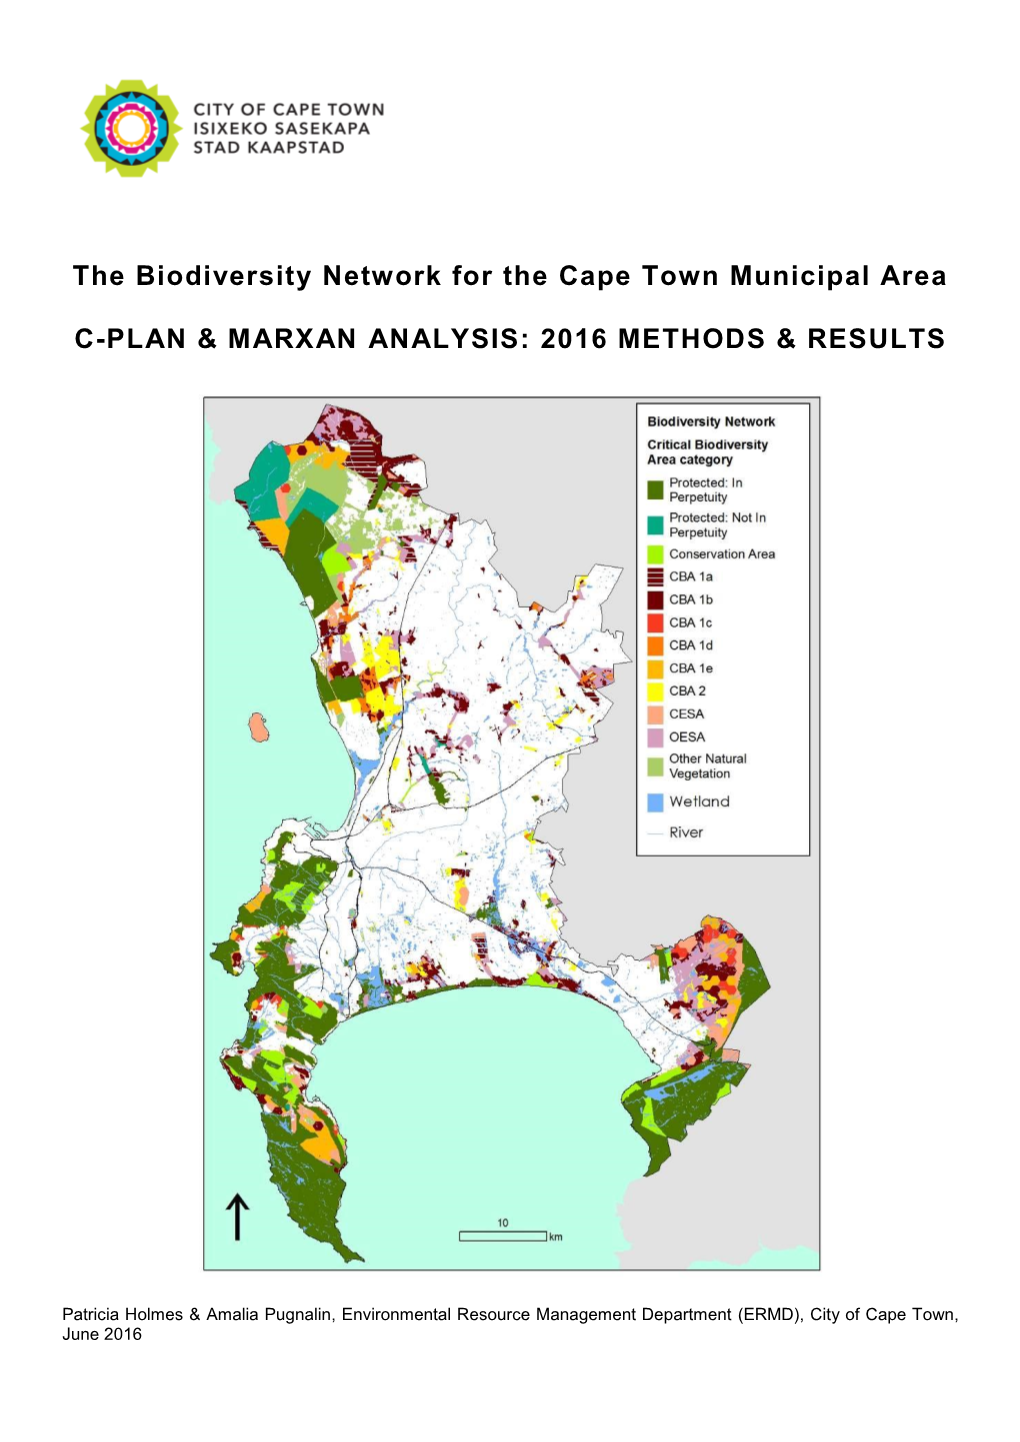 The Biodiversity Network for the Cape Town Municipal Area